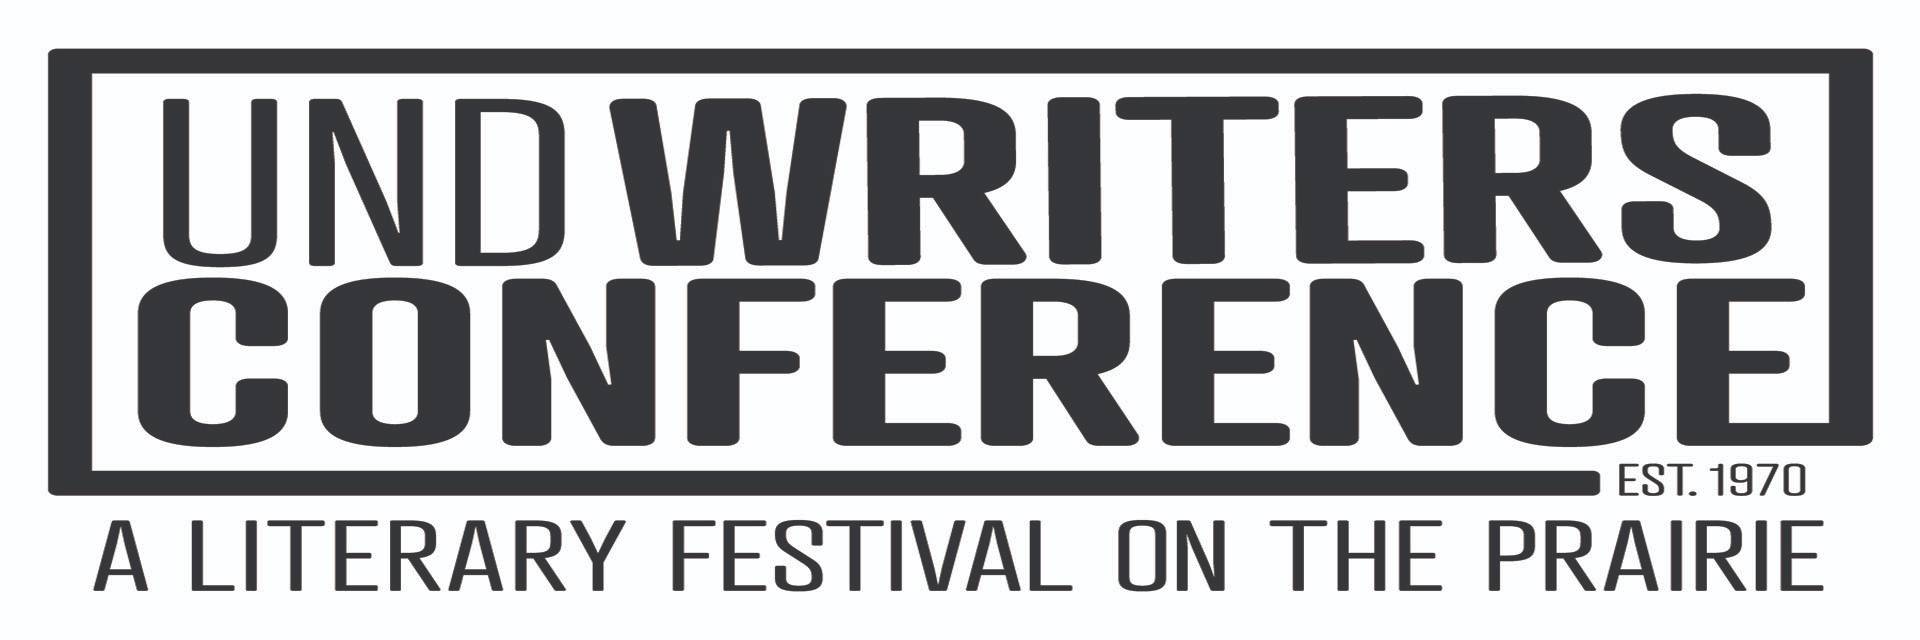 53rd Annual UND Writers Conference